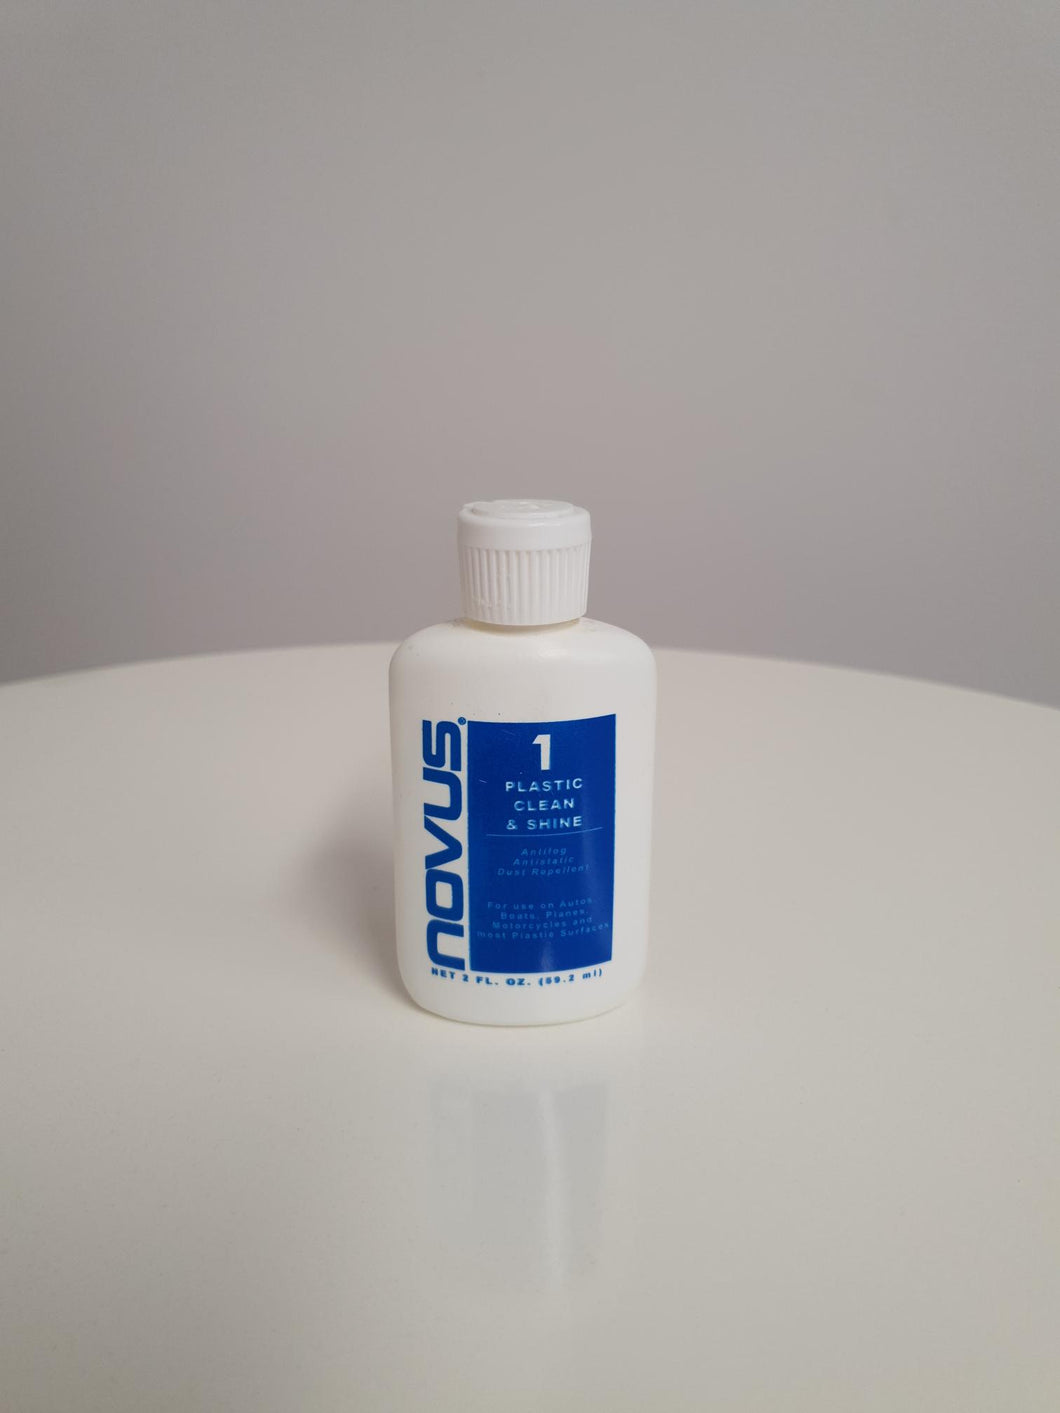 NOVUS No. 1 – Clean and Protect - 59 ml